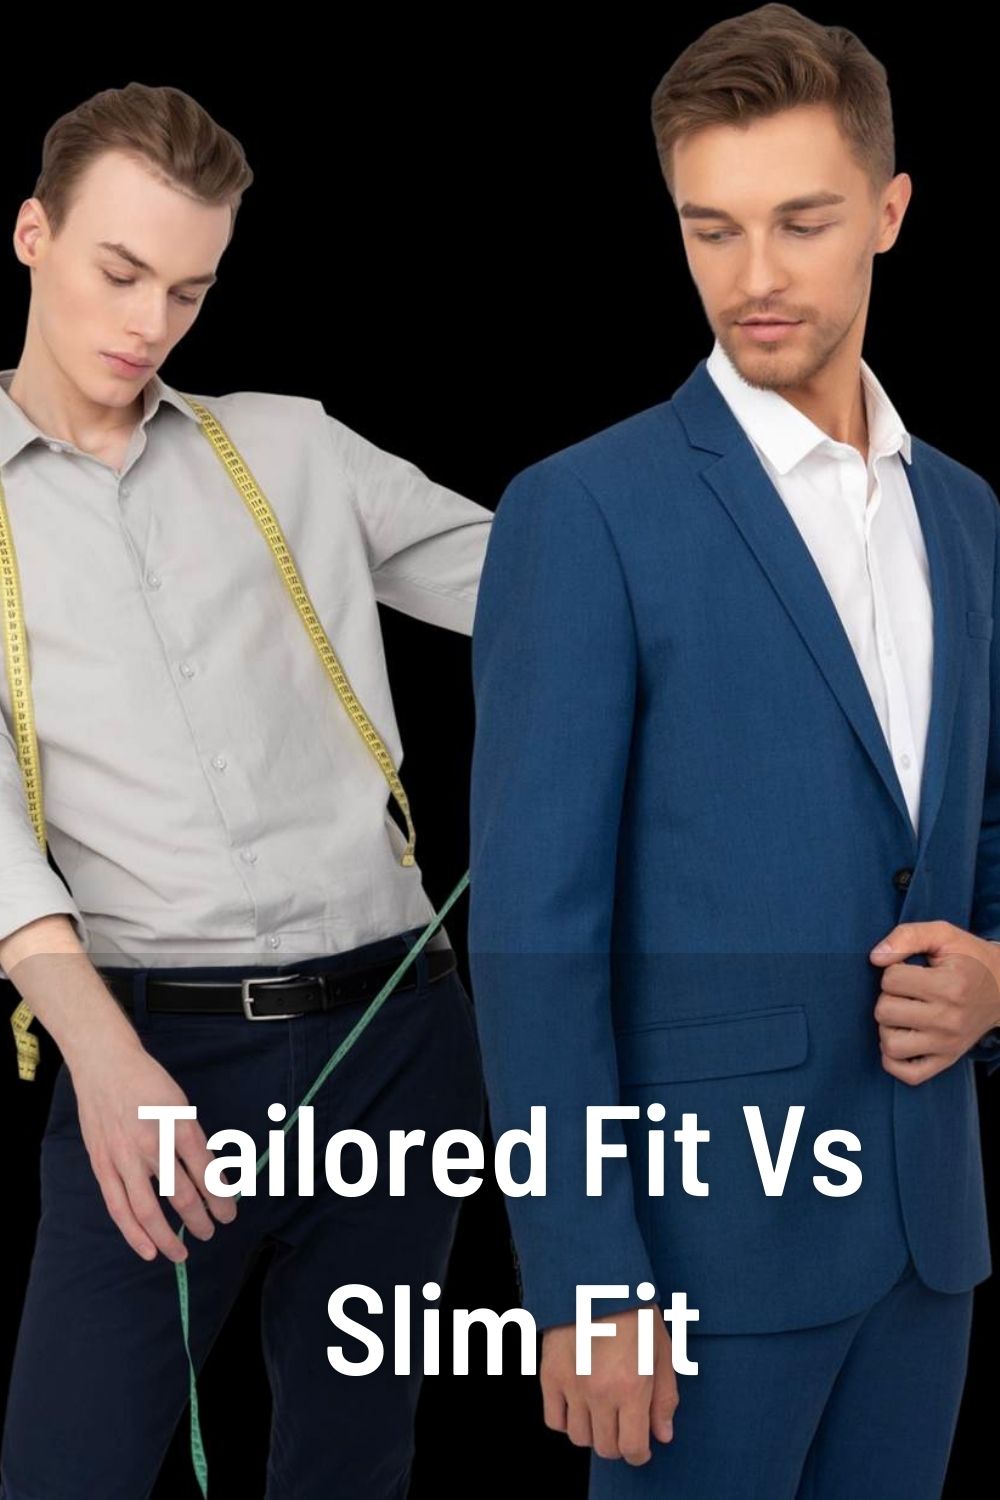 Tailored Fit Vs Slim Fit